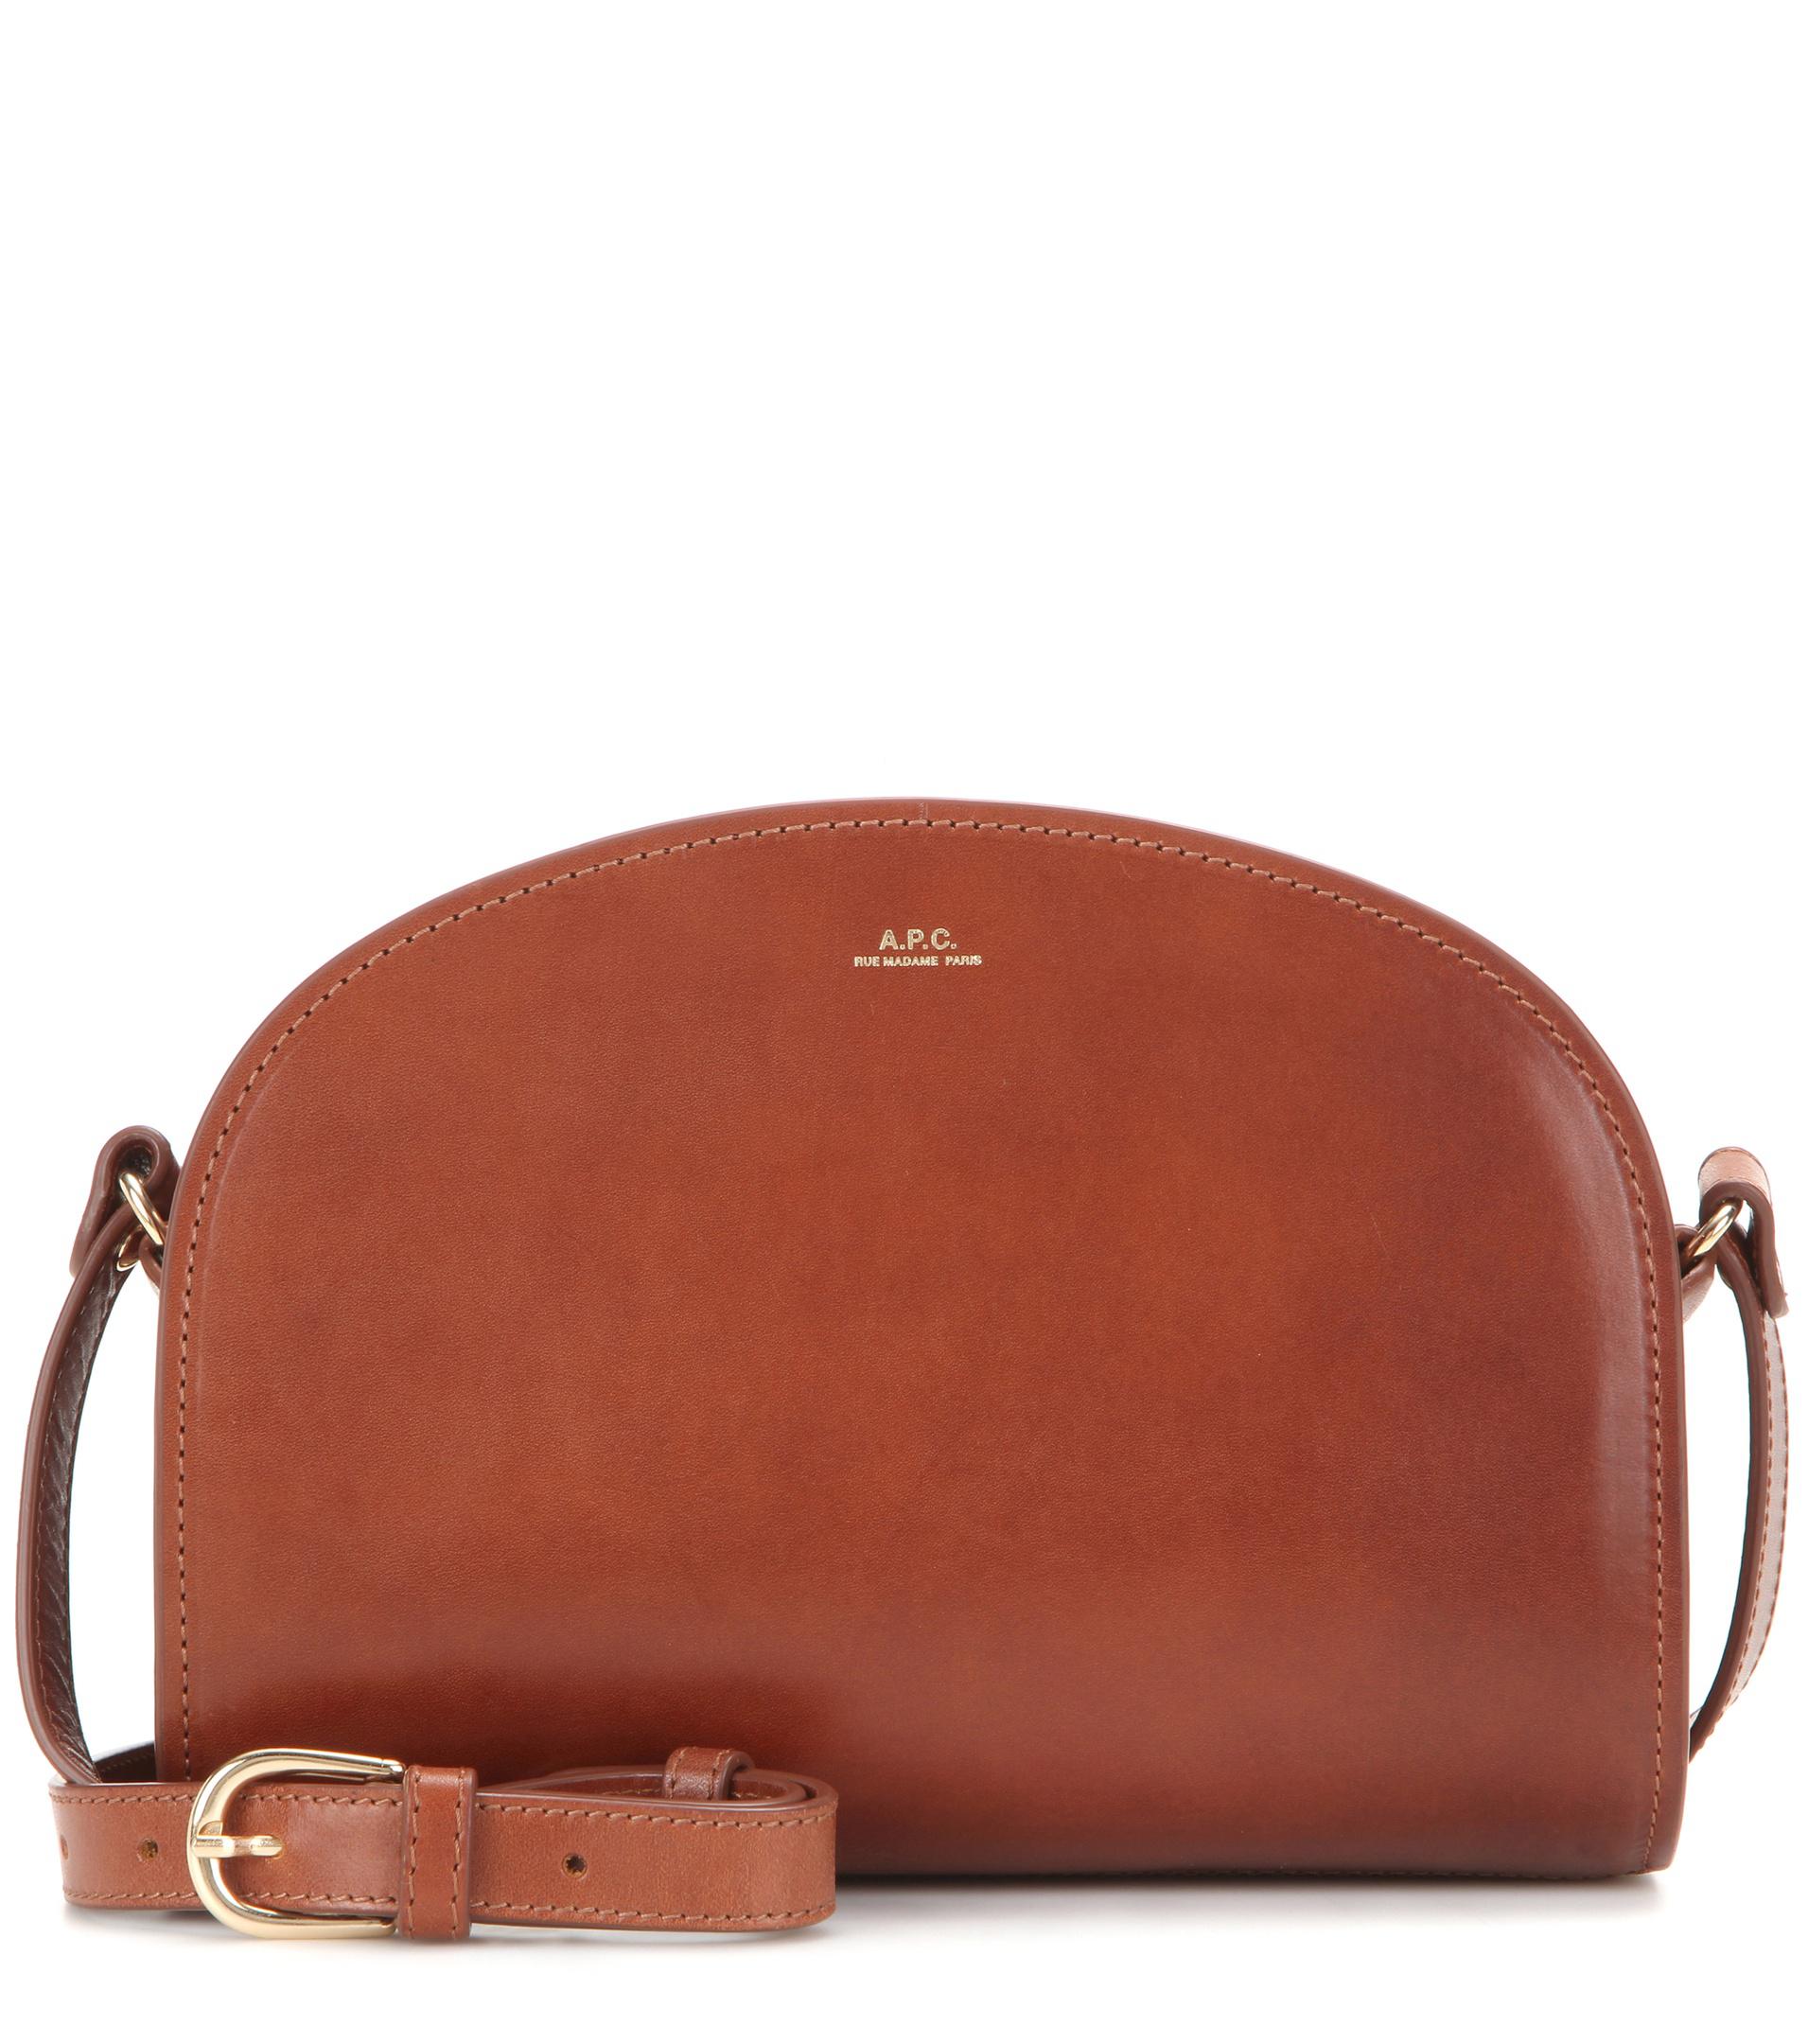 A.P.C. Demi-Lune Leather Shoulder Bag in Brown - Save 18% - Lyst